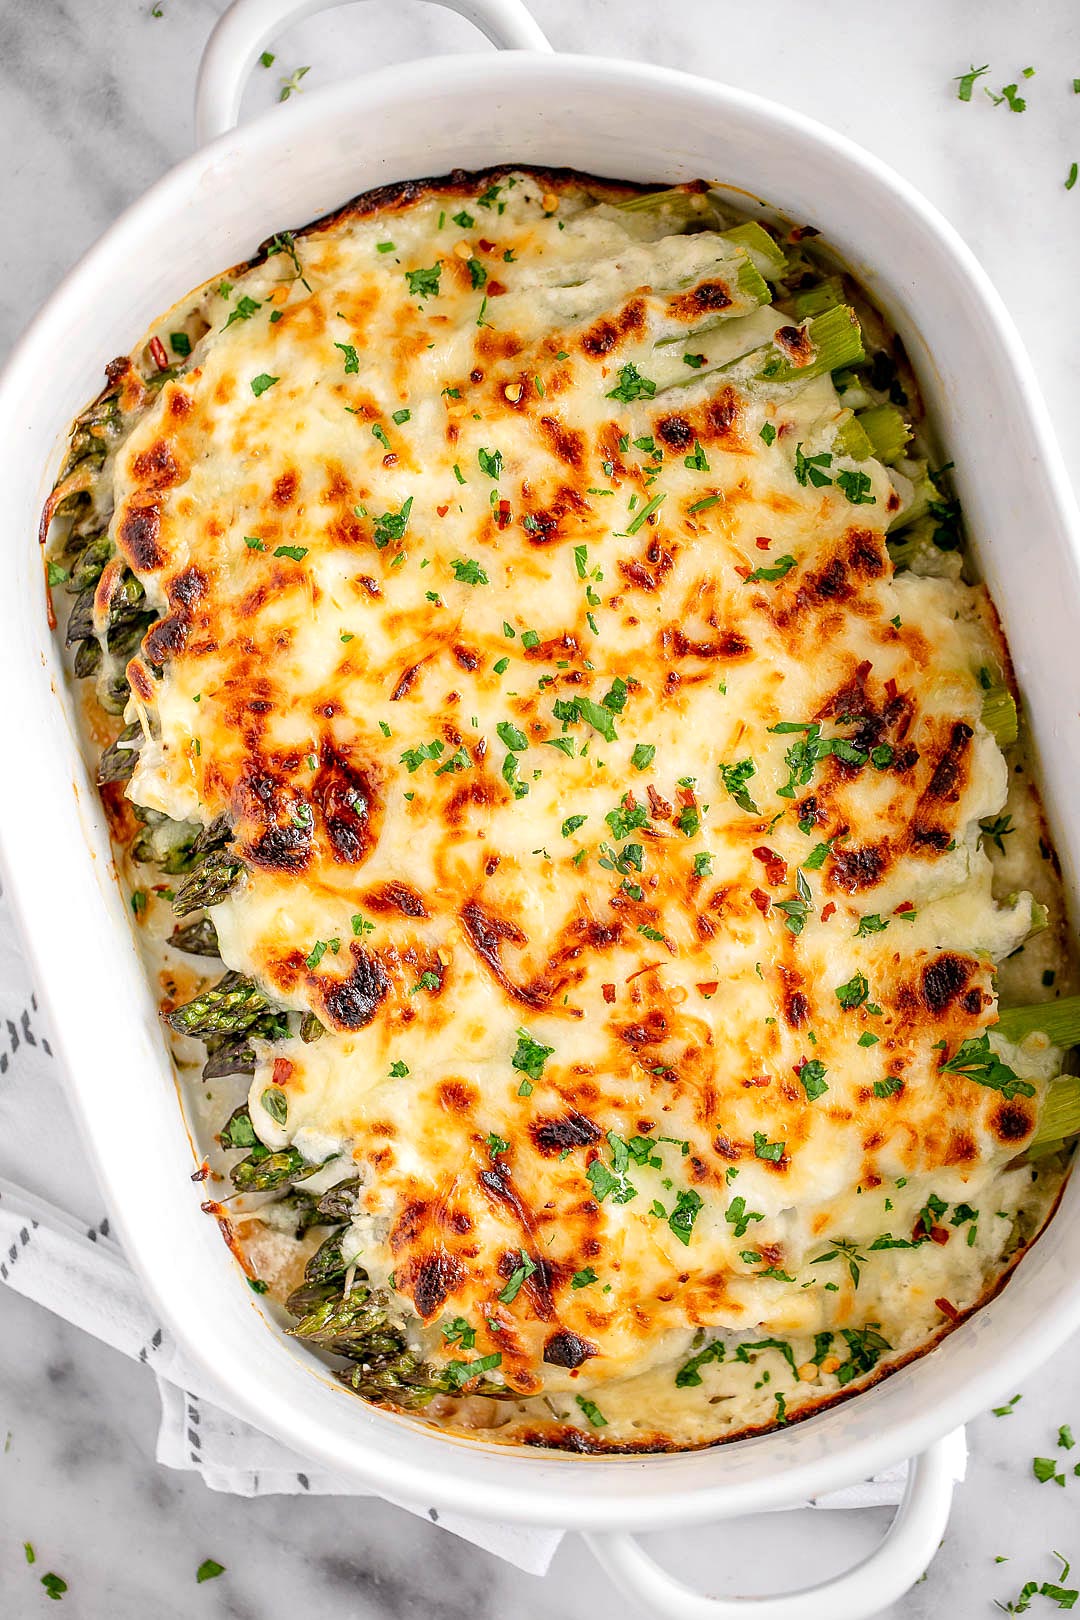 FRIENDSGIVING-SIDE-DISHES-asparagus-casserole-with-cheese